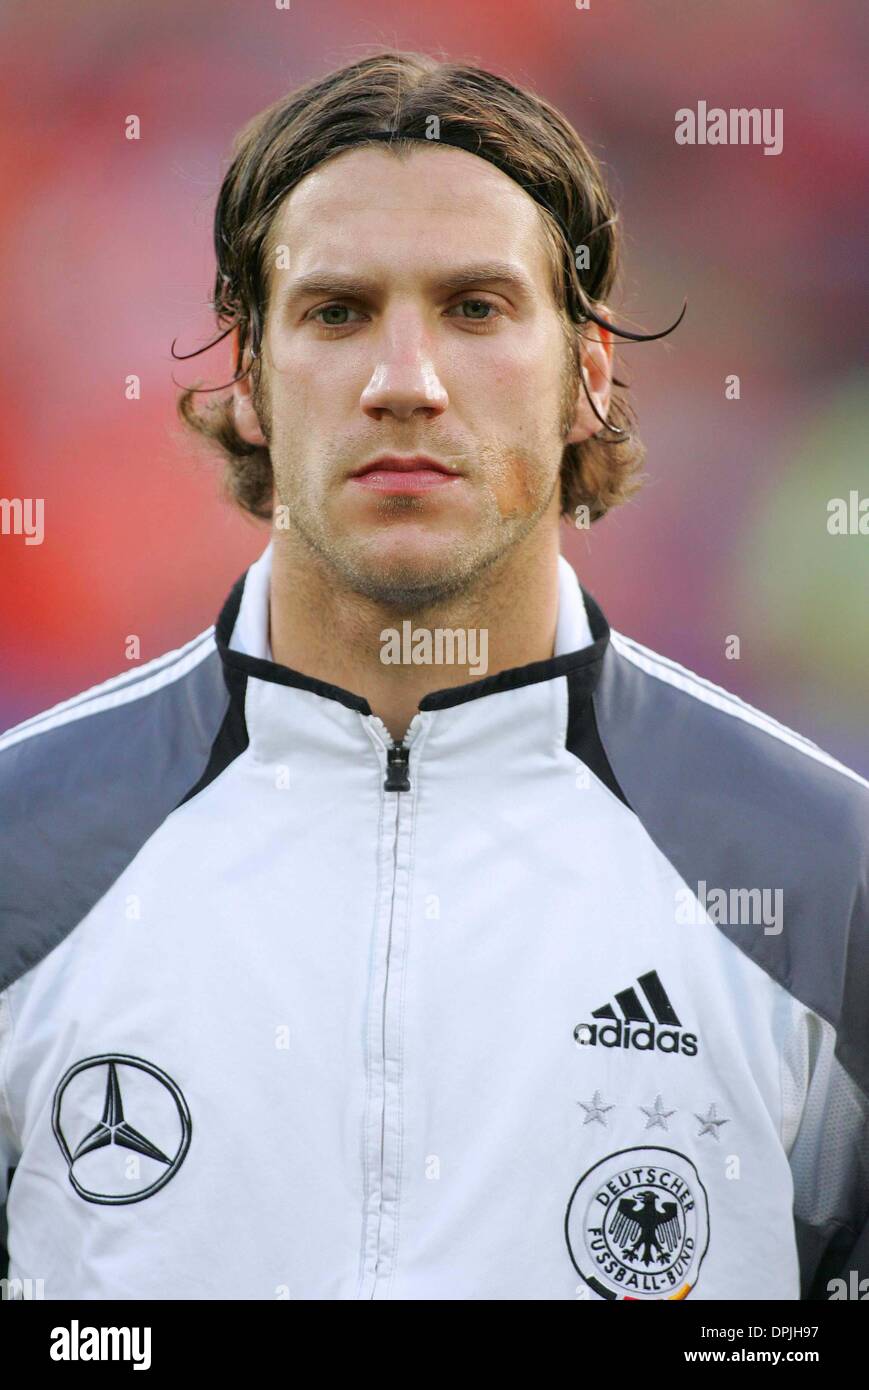 TORSTEN FRINGS.GERMANY & WERDER BREMEN.HOLLAND V GERMANY.ROTTERDAM,HOLLAND.17/08/2005.DII35947.K47872.WORLD CUP PREVIEW 2006 Stock Photo